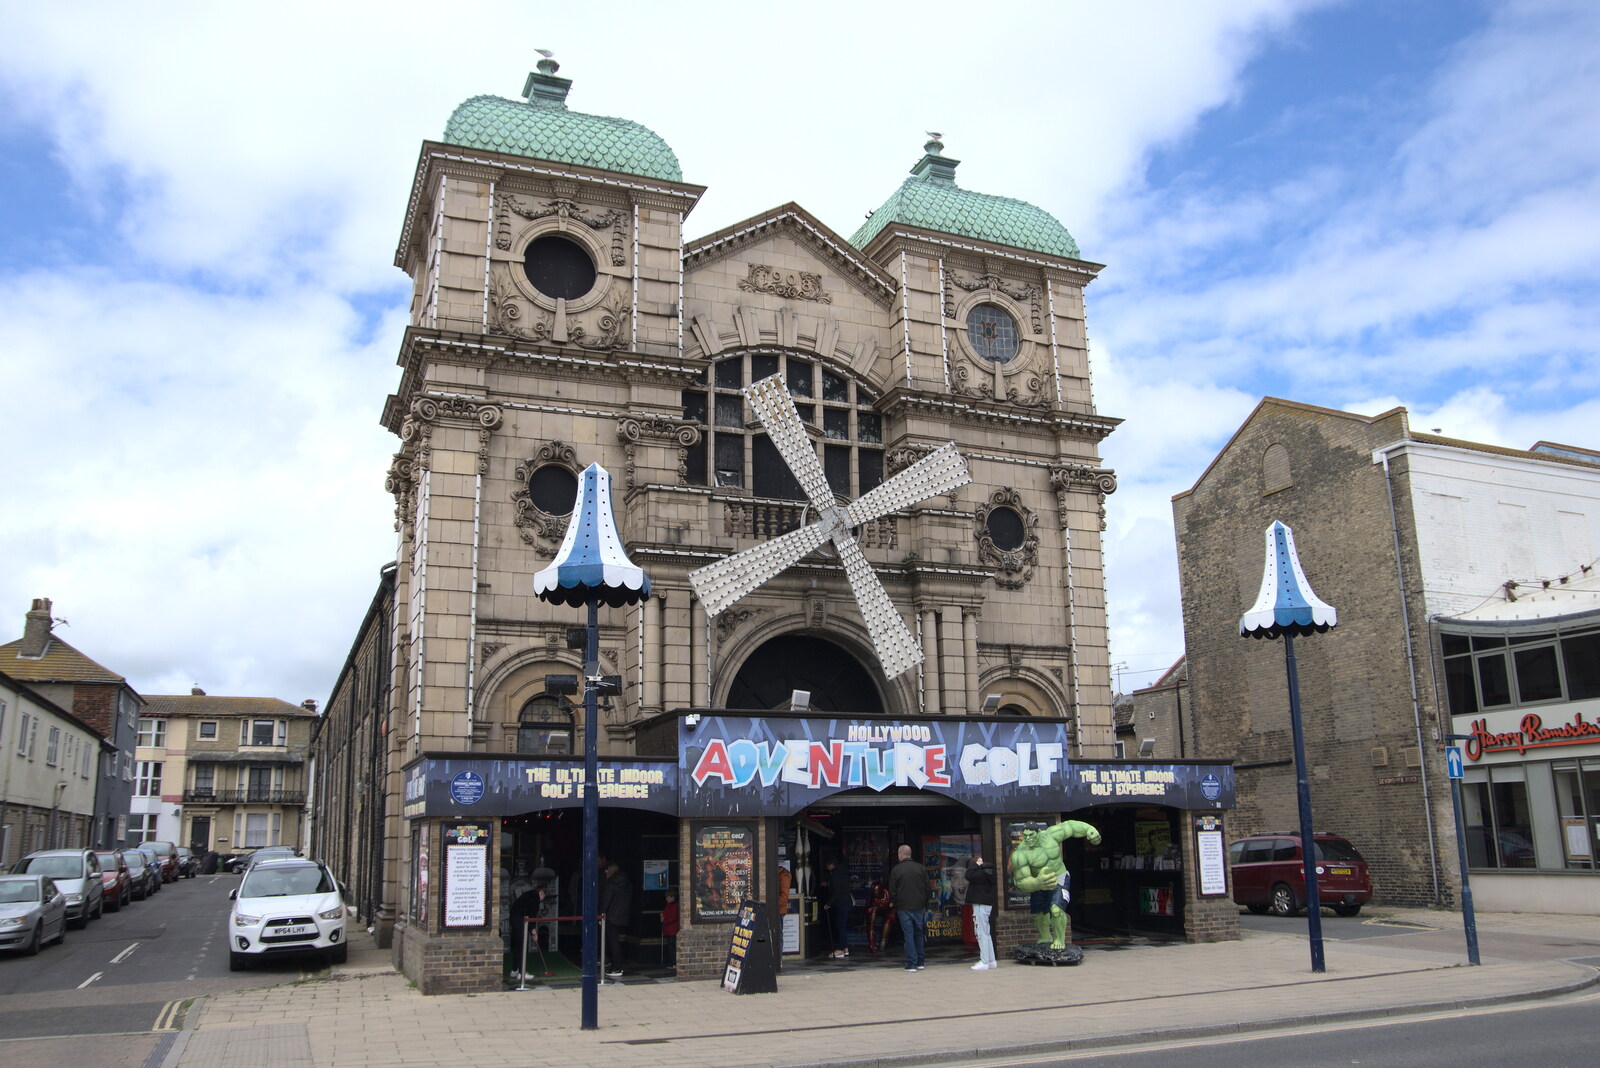 The 1908 Windmill Theater from Faded Seaside Glamour: A Weekend in Great Yarmouth, Norfolk - 29th May 2022